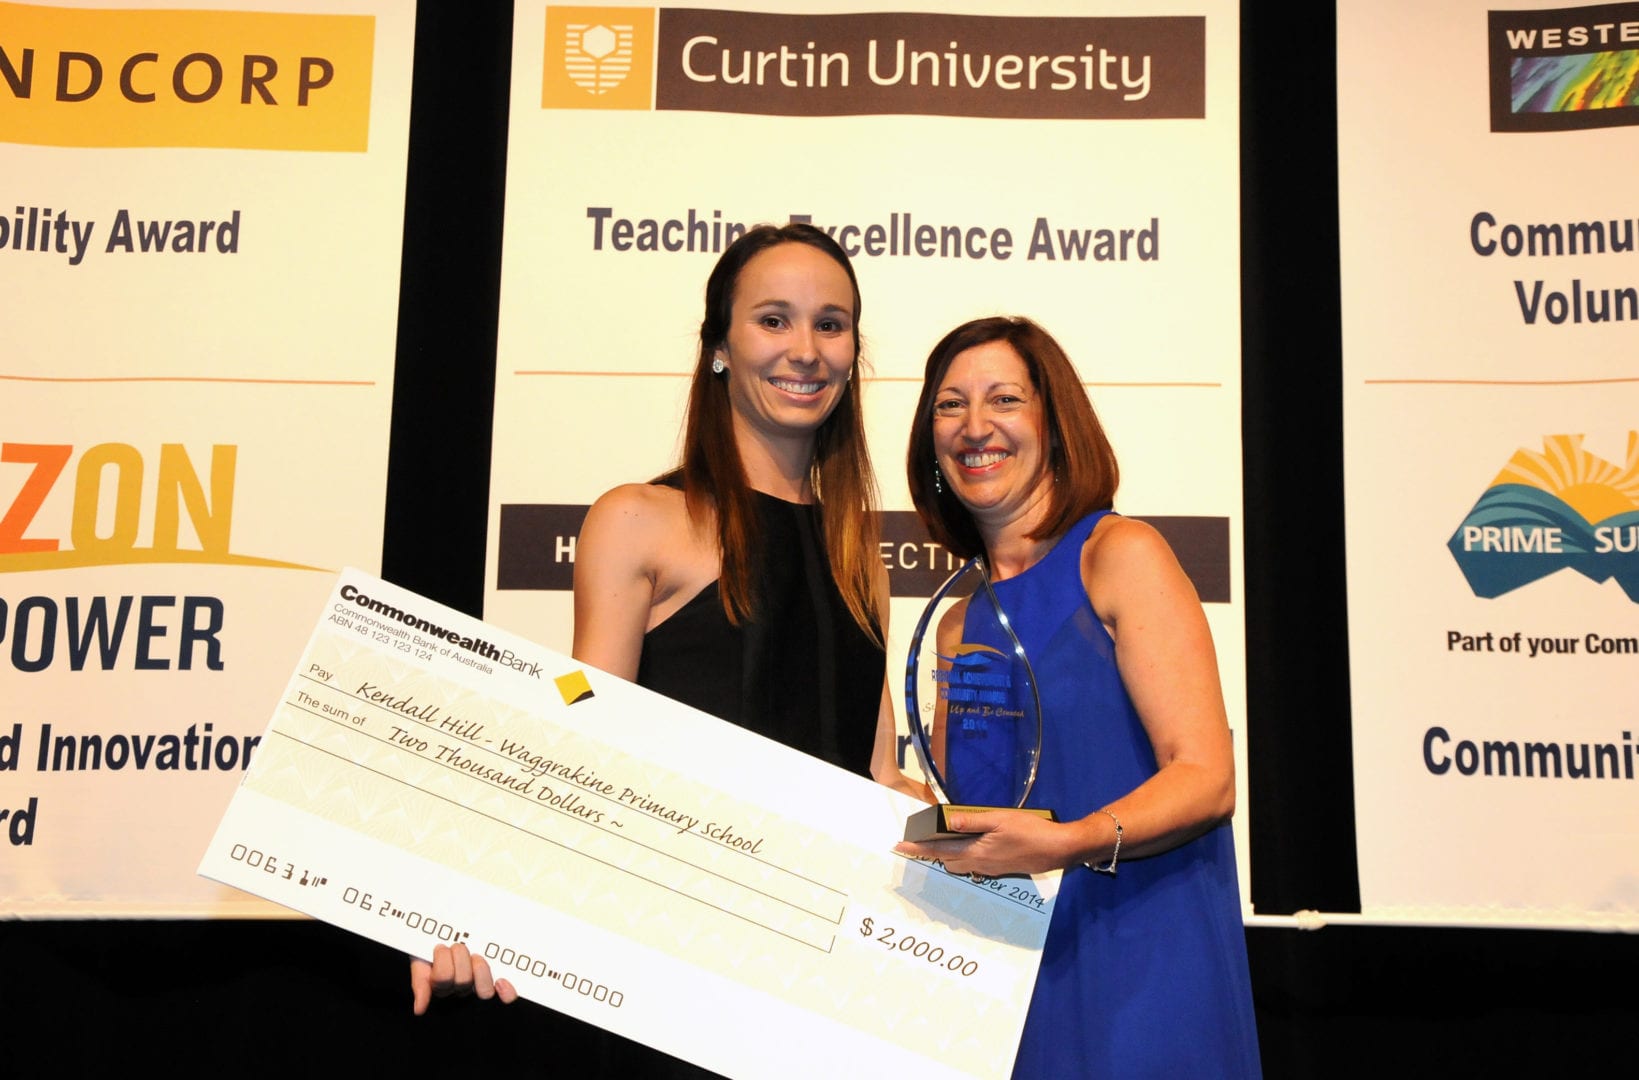 Image for Geraldton teacher receives the Curtin Teaching Excellence Award